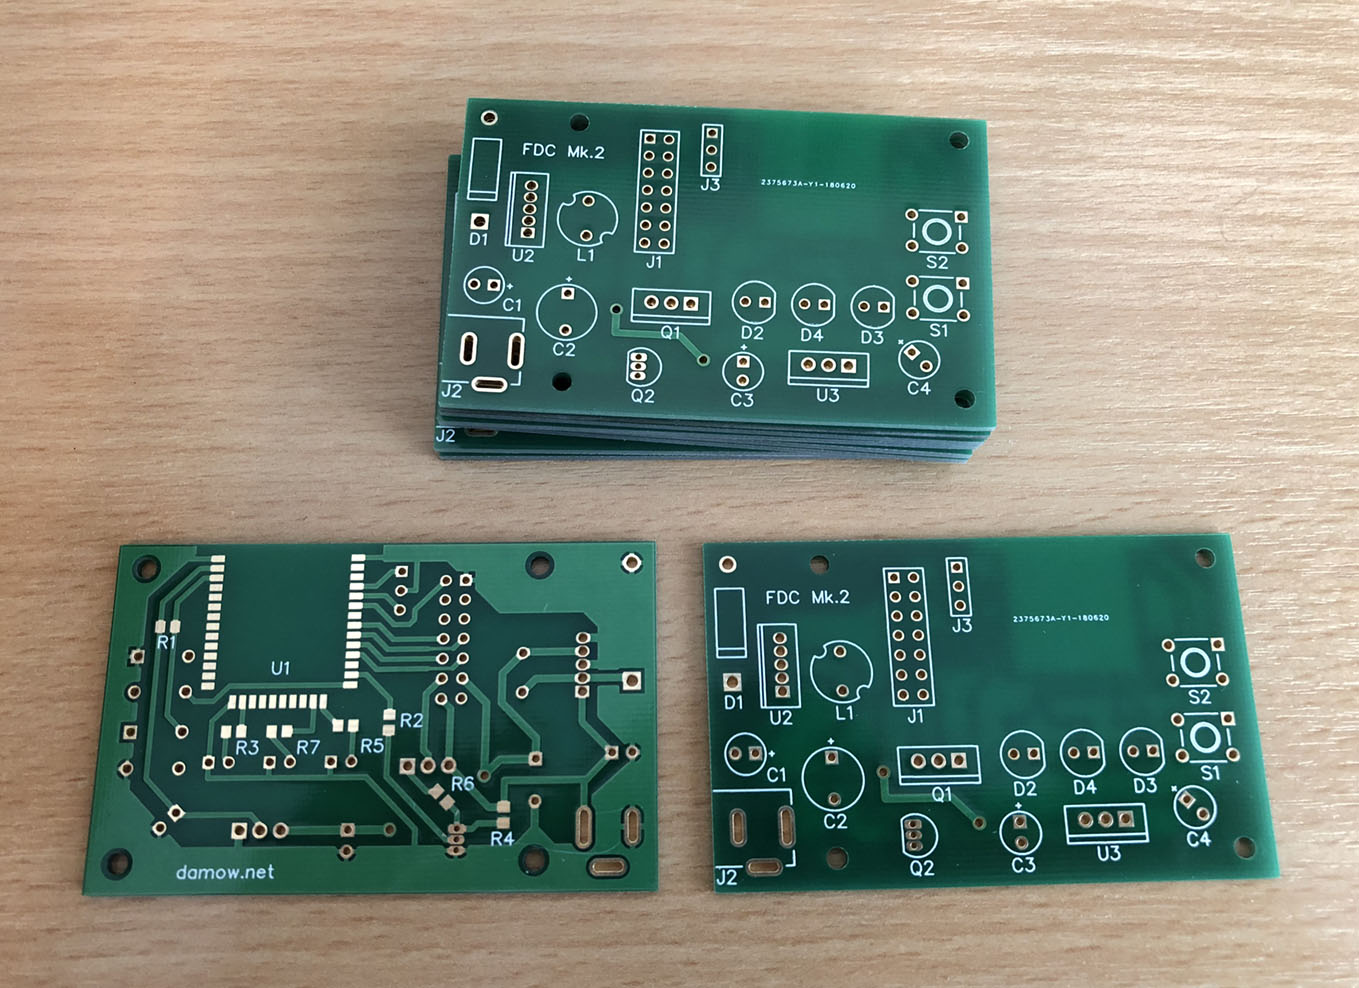 Finished PCBs arrived from China